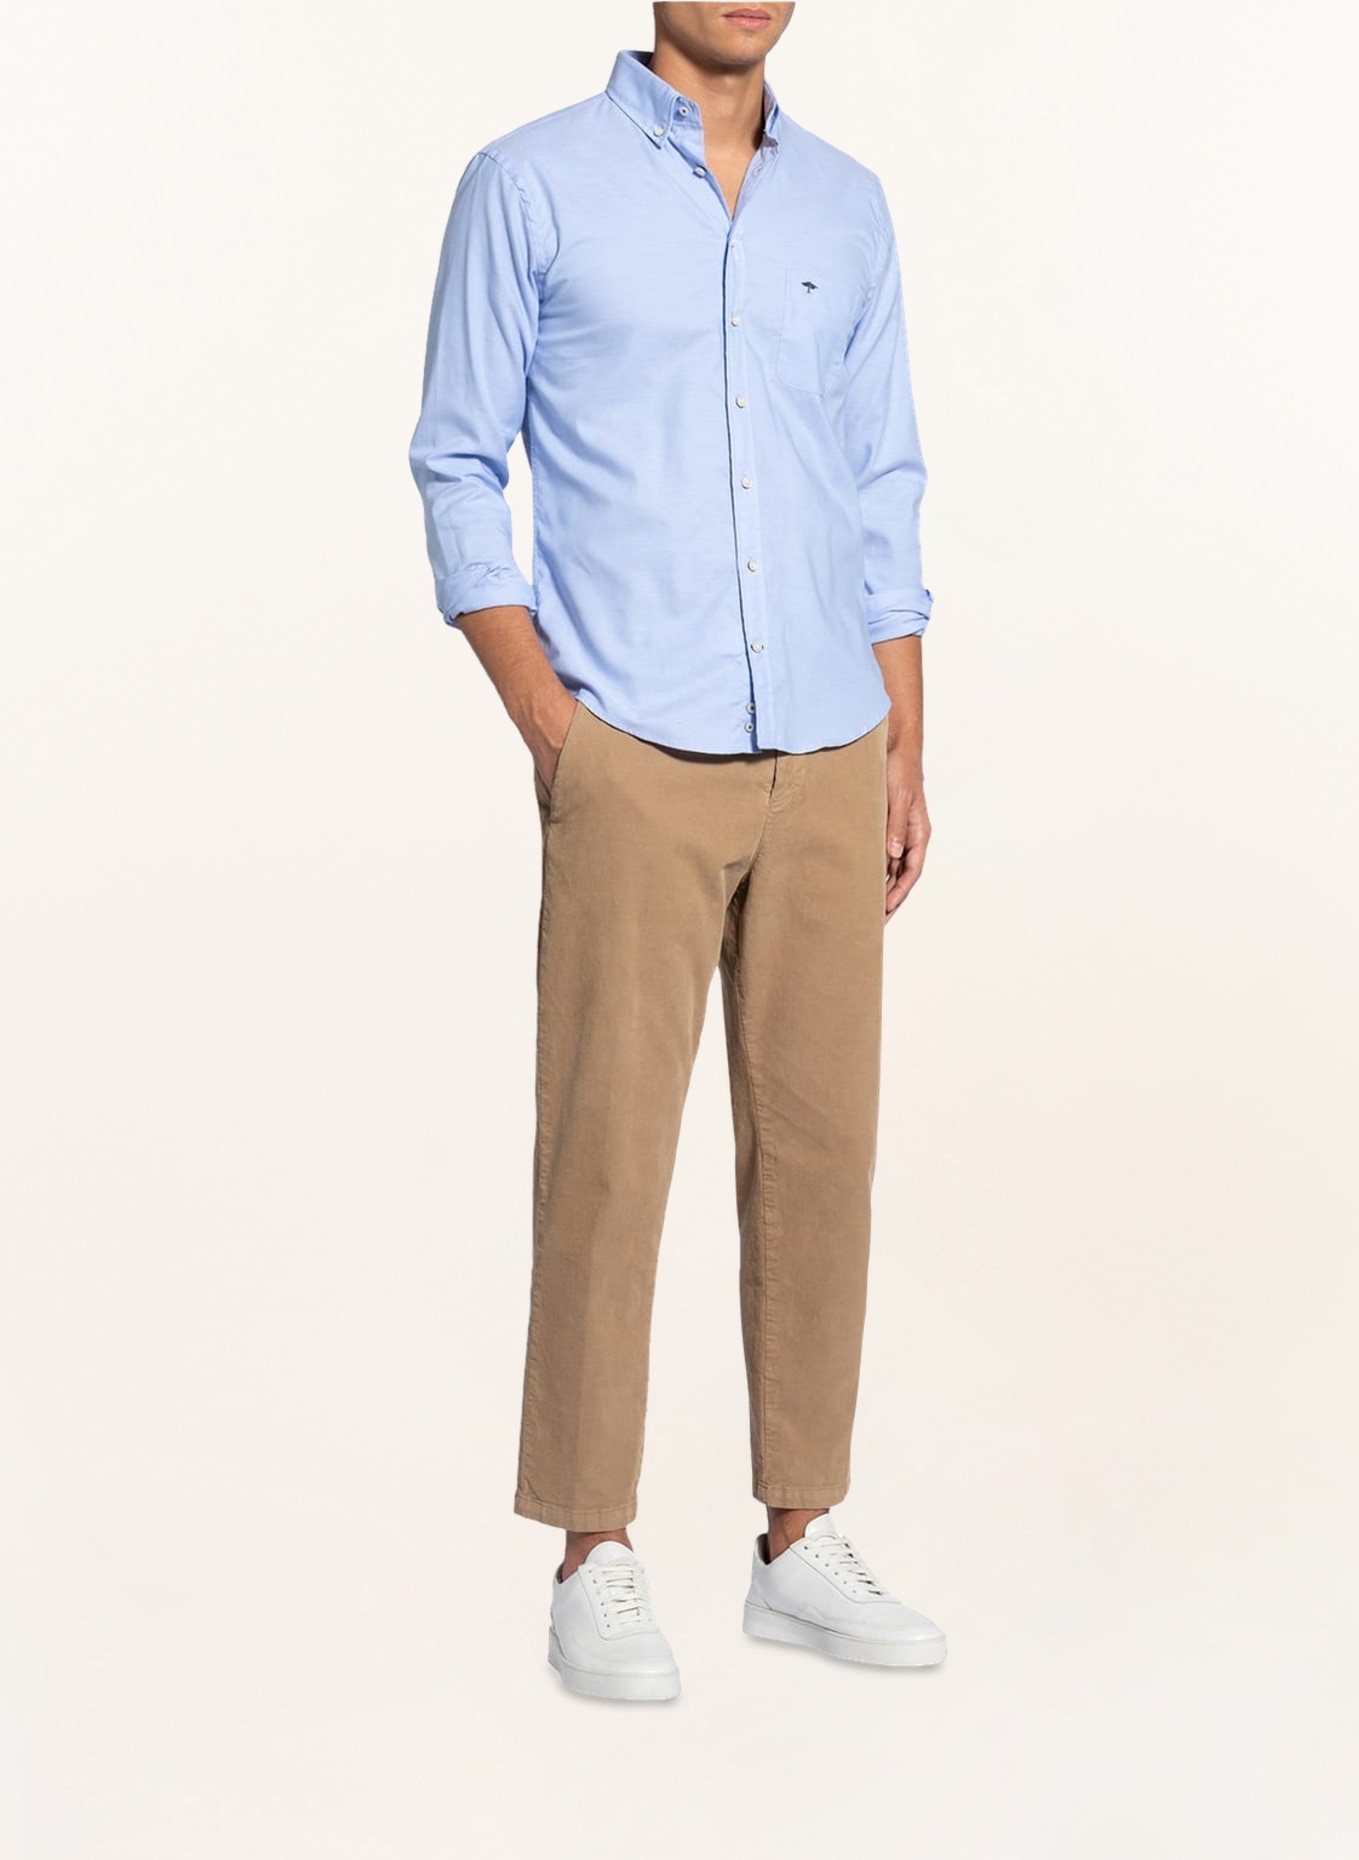 fit blue FYNCH-HATTON light casual in Shirt